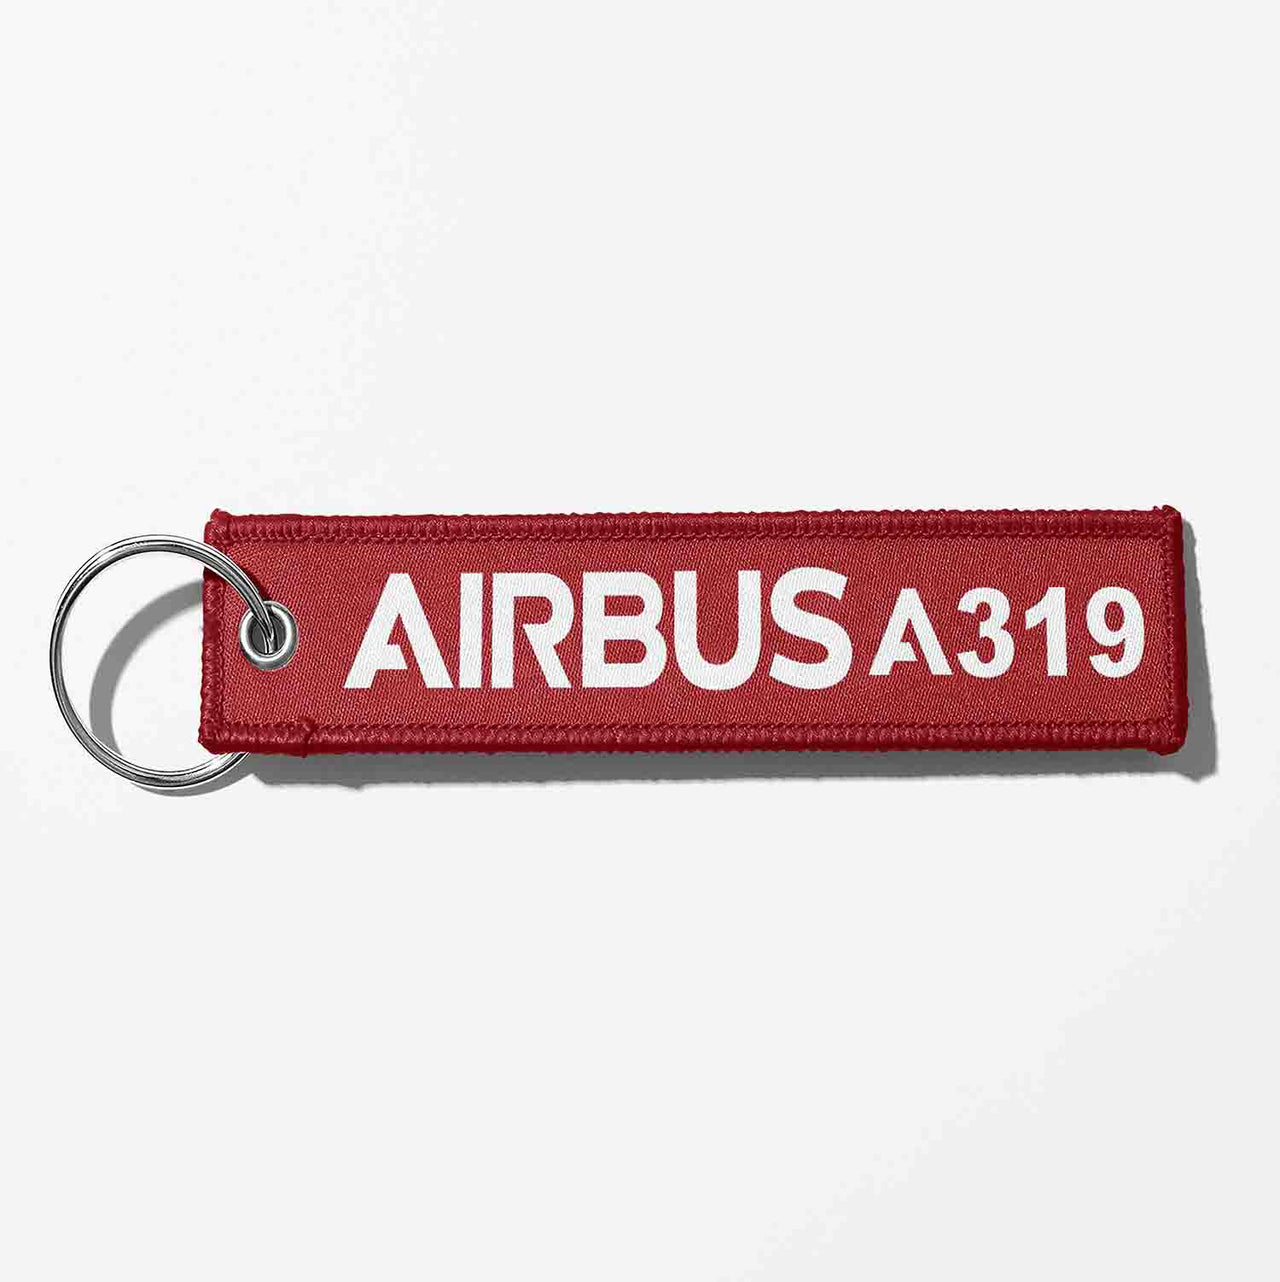 Airbus A319 & Text Designed Key Chains